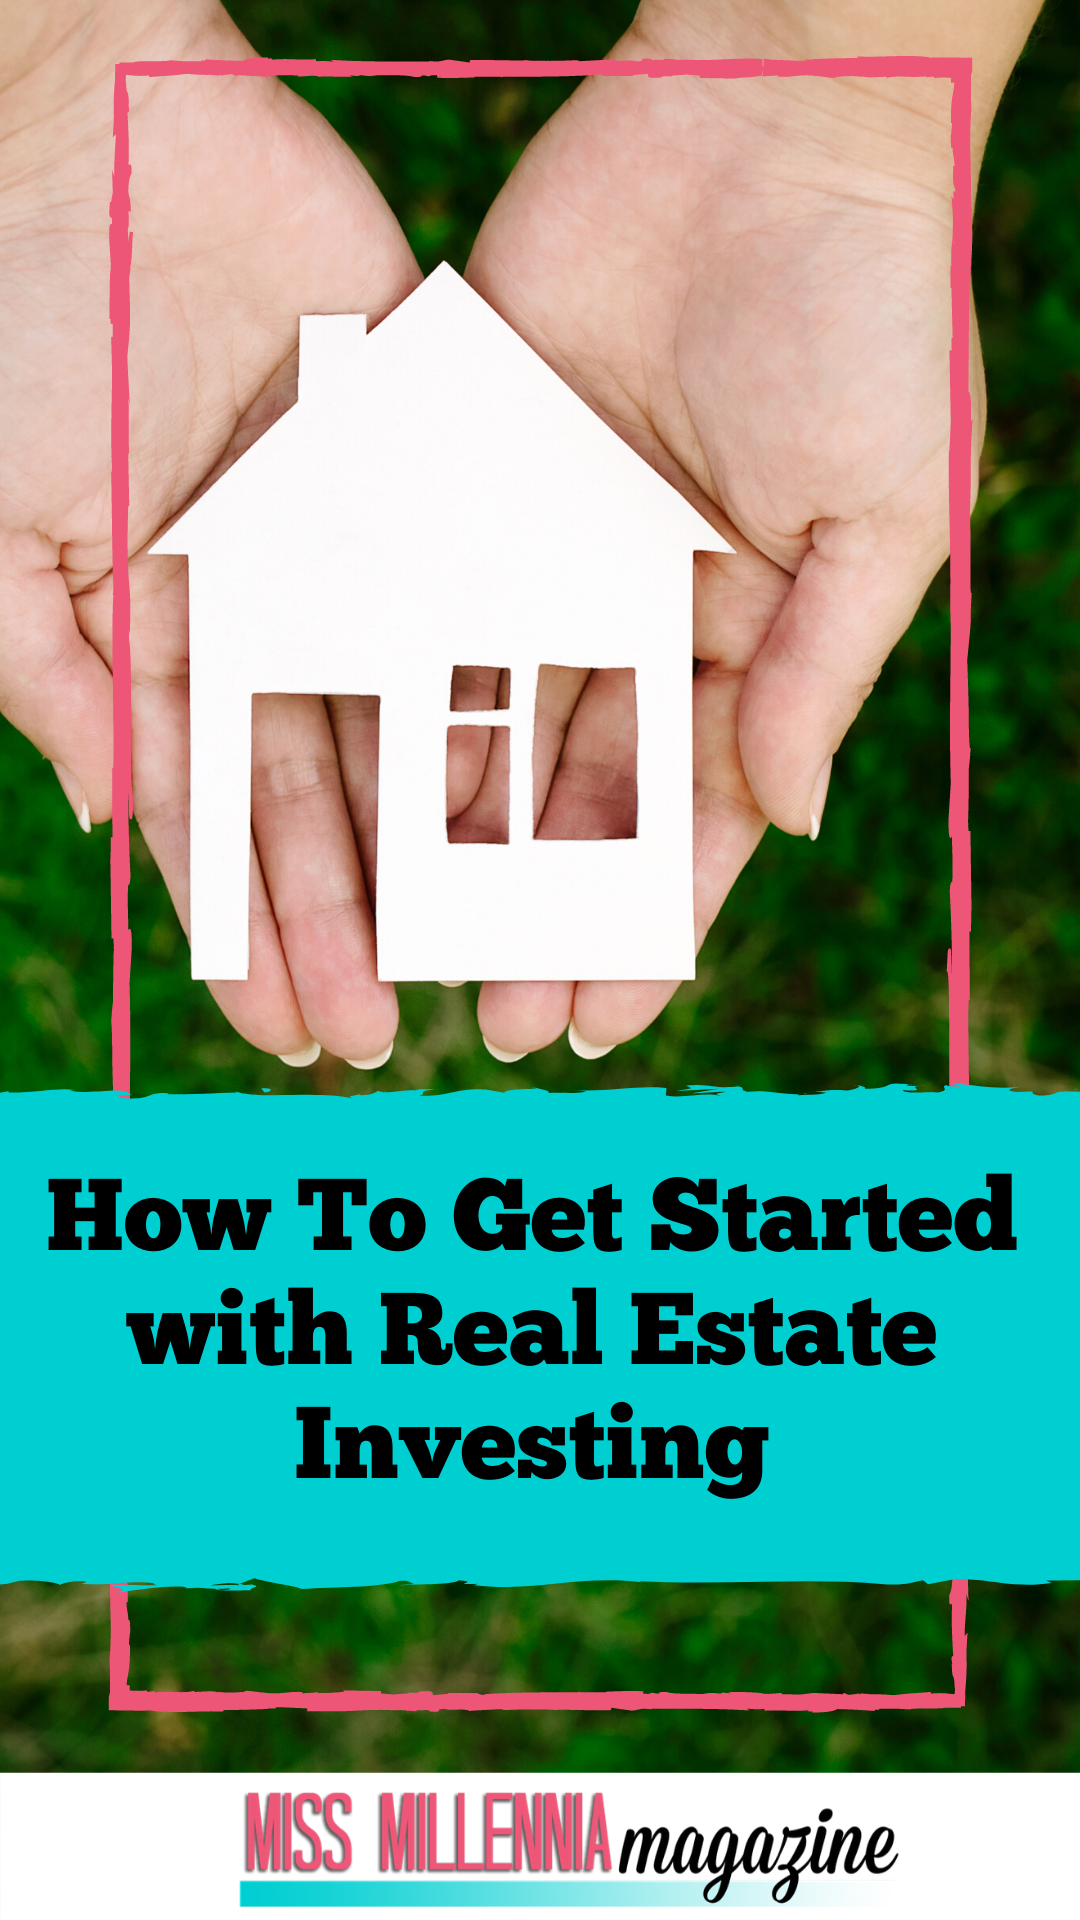 How To Get Started with Real Estate Investing